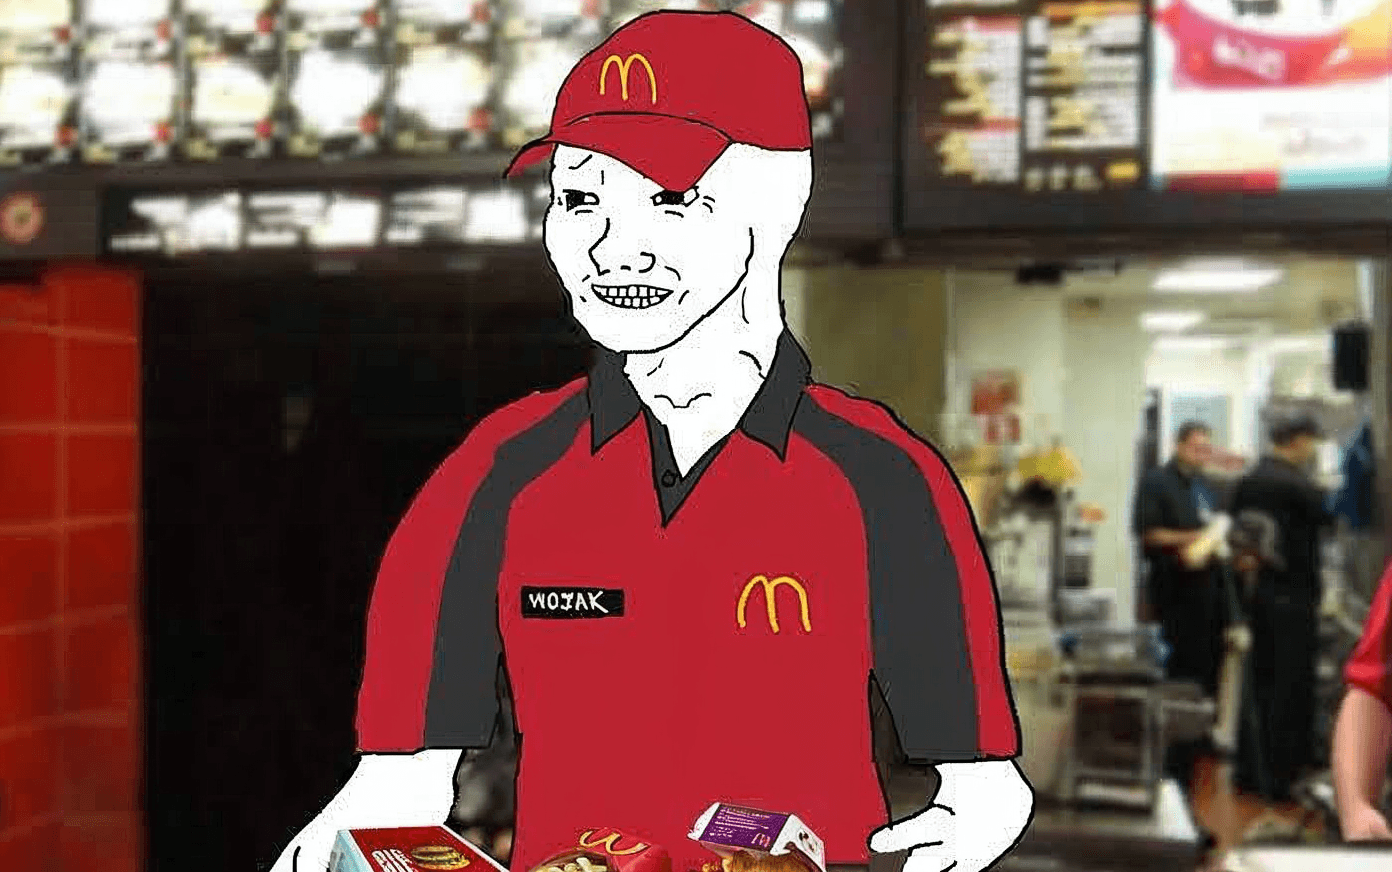 May I take your order?